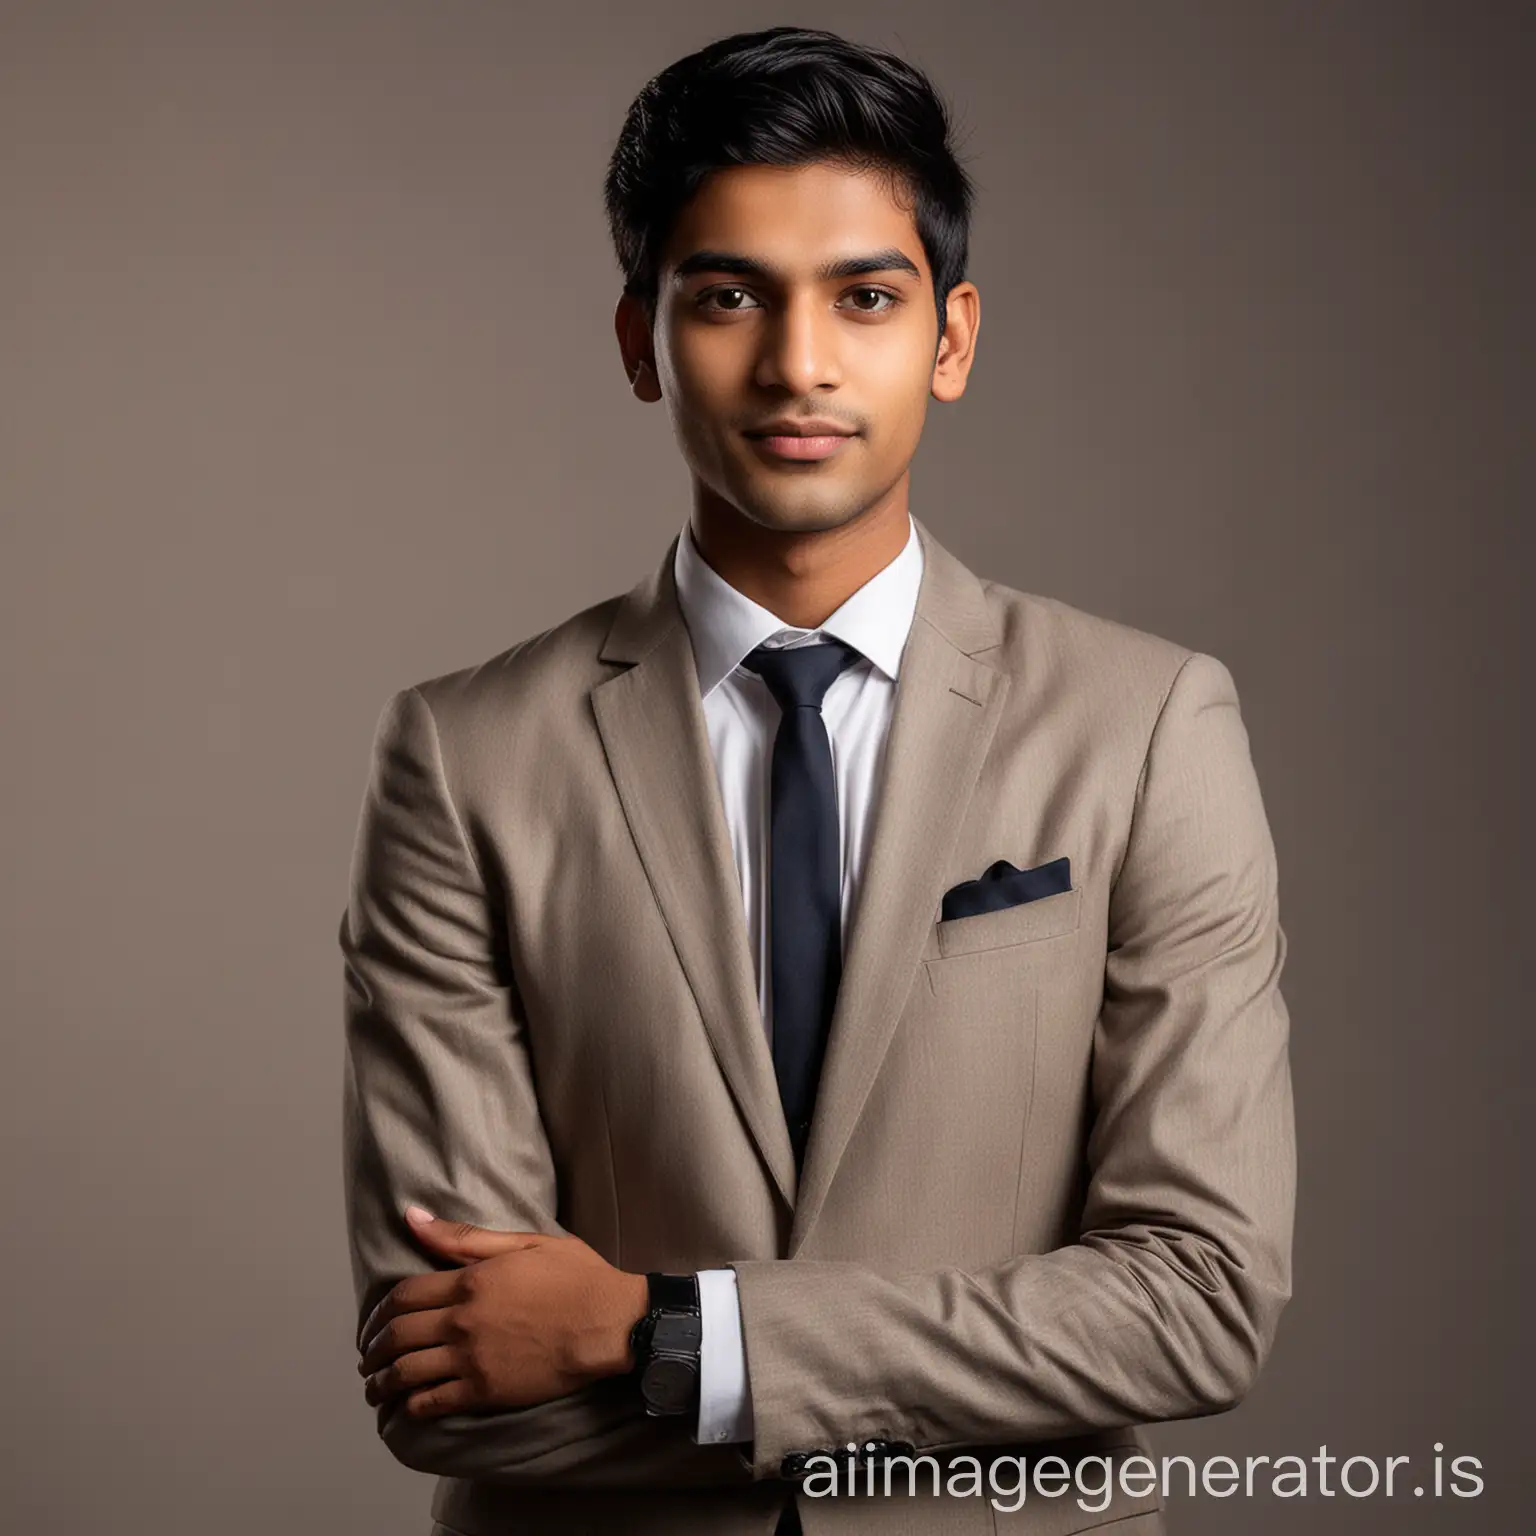 25 year old indian boy With fair skin  and narrow body Posing for a linkedin picture in formals formed light in background